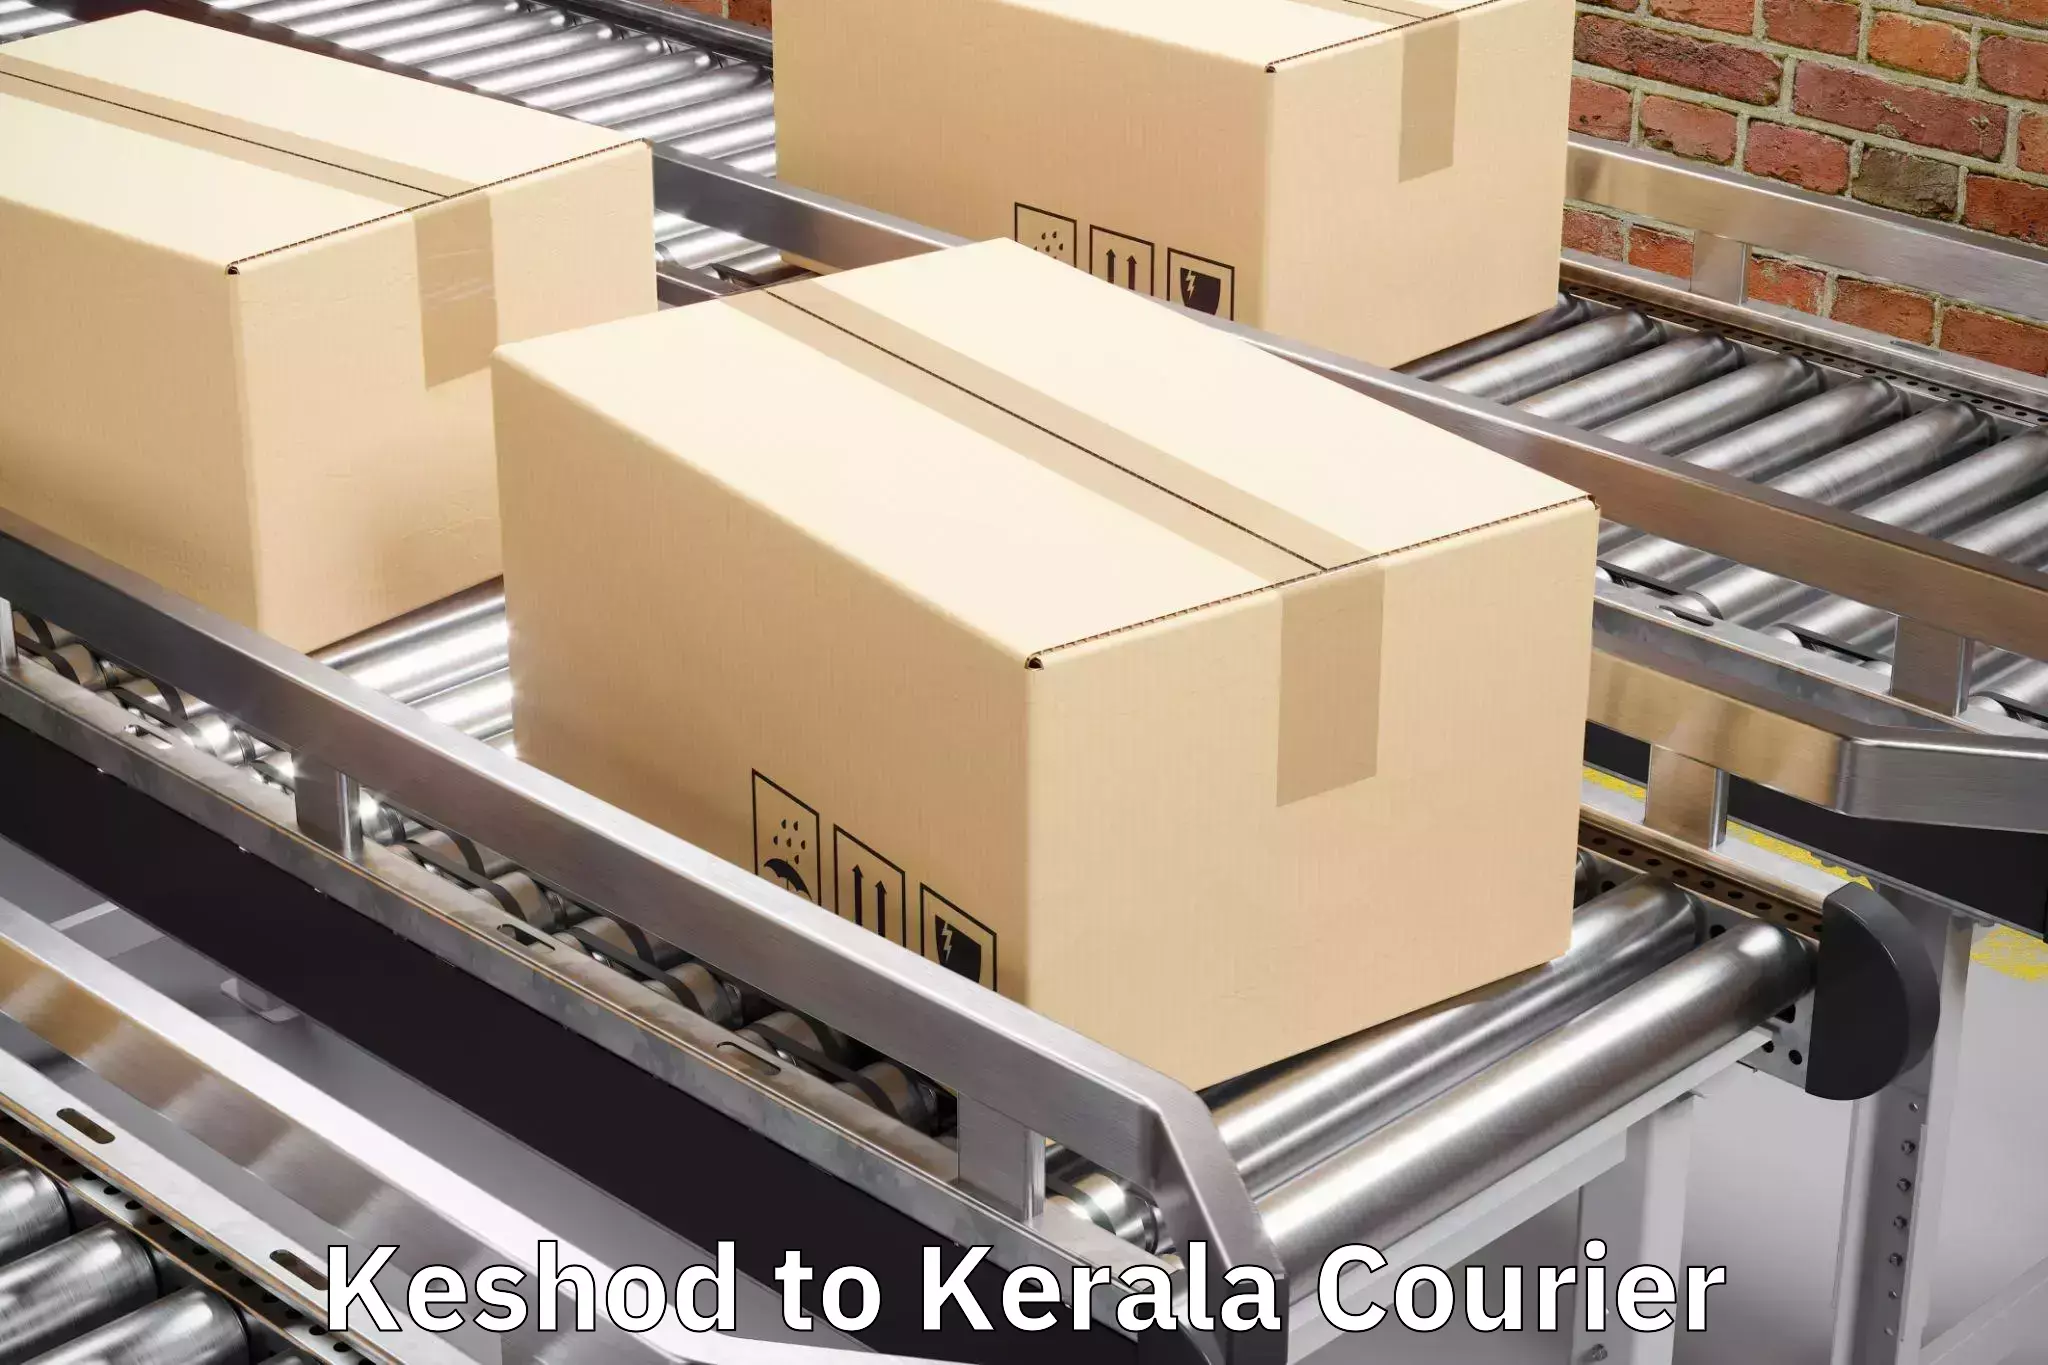 Instant baggage transport quote Keshod to Cochin University of Science and Technology